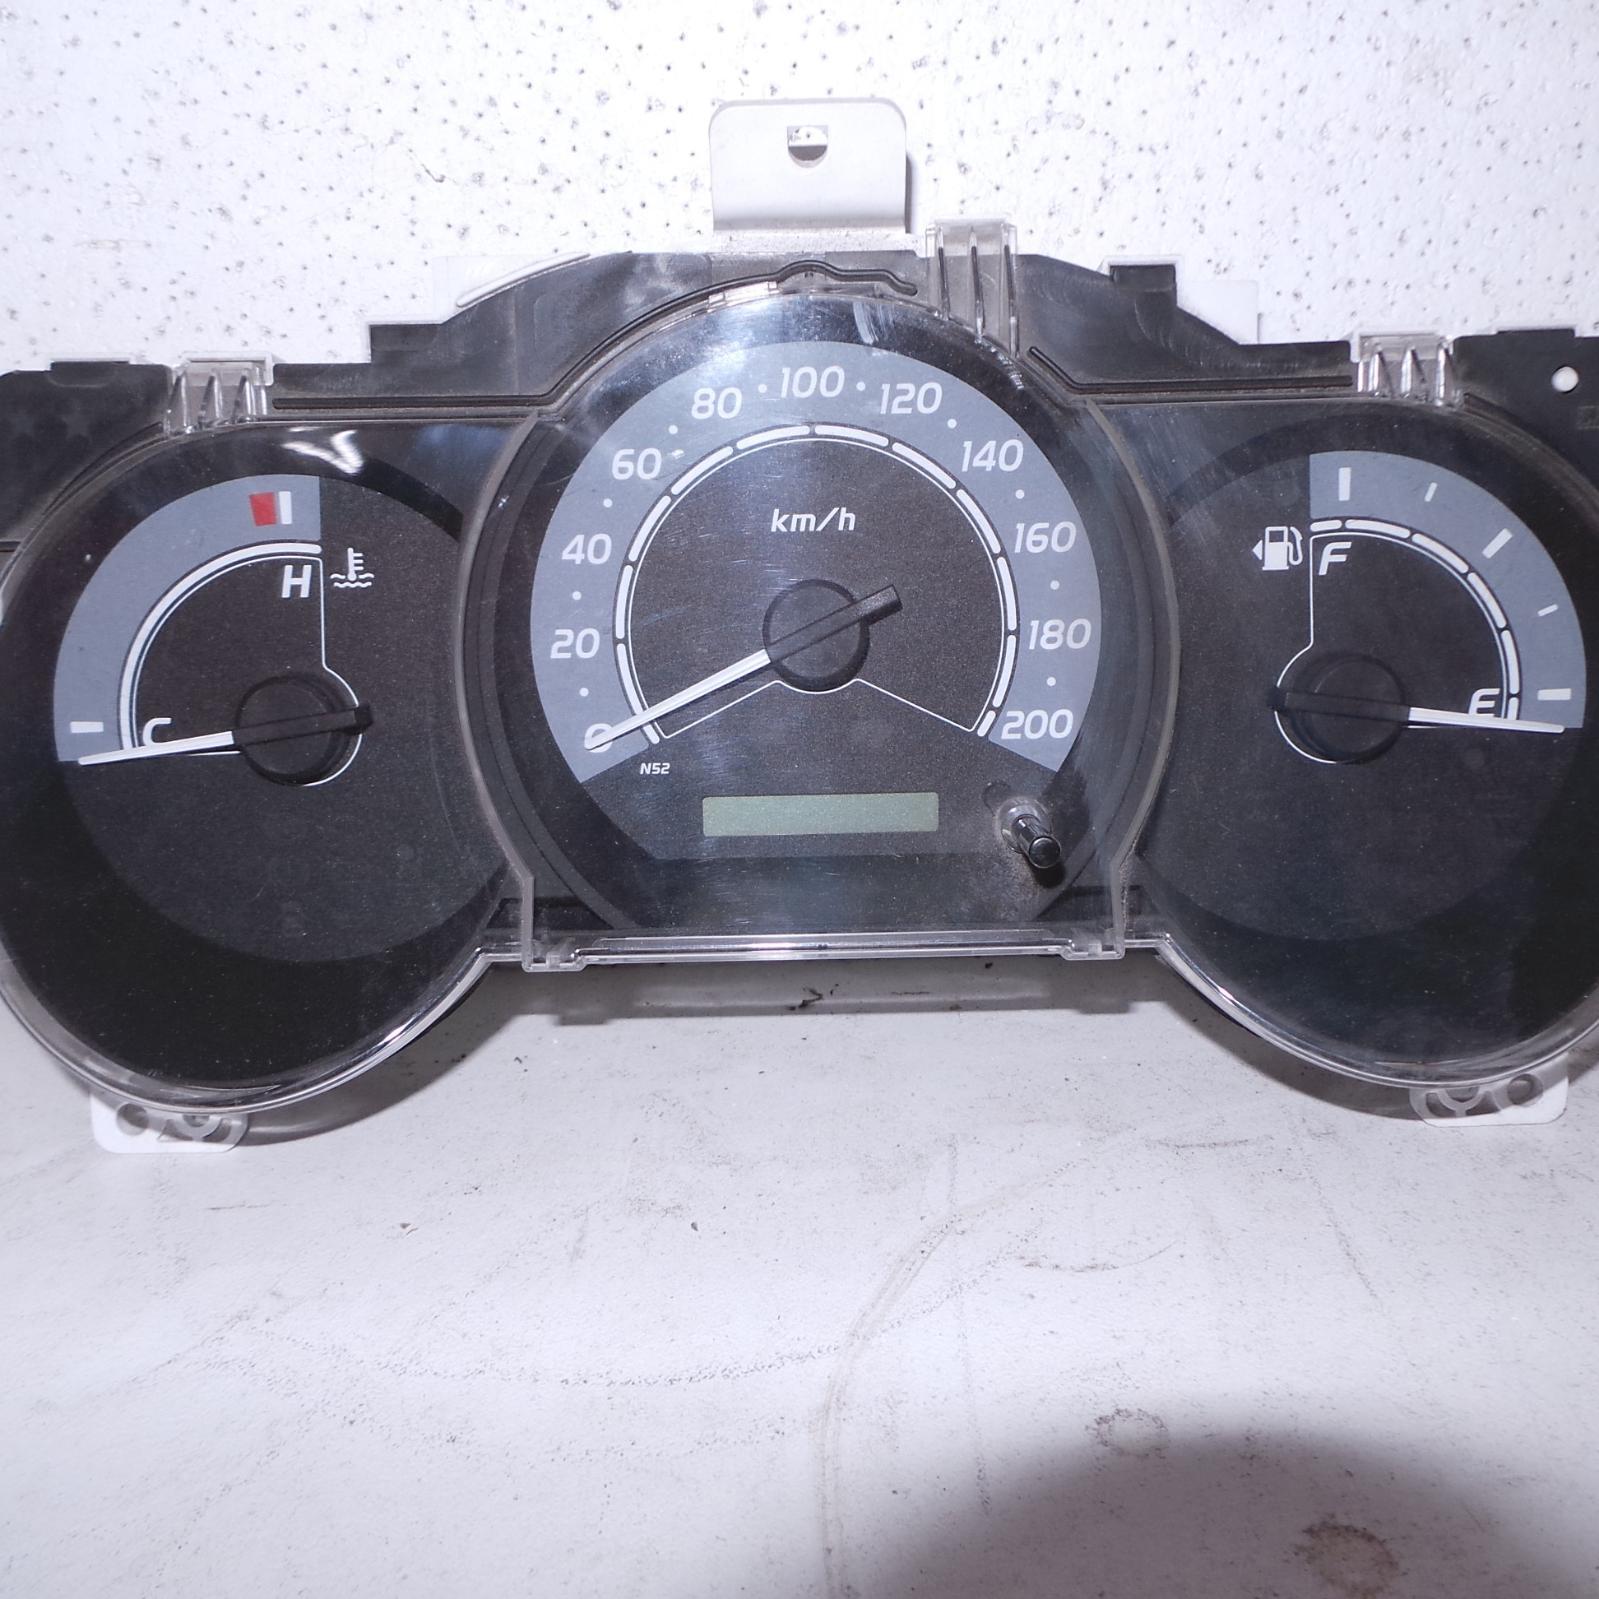 TOYOTA HILUX, Instrument Cluster, PETROL, 2.7, WORKMATE, 02/05-06/11 38330